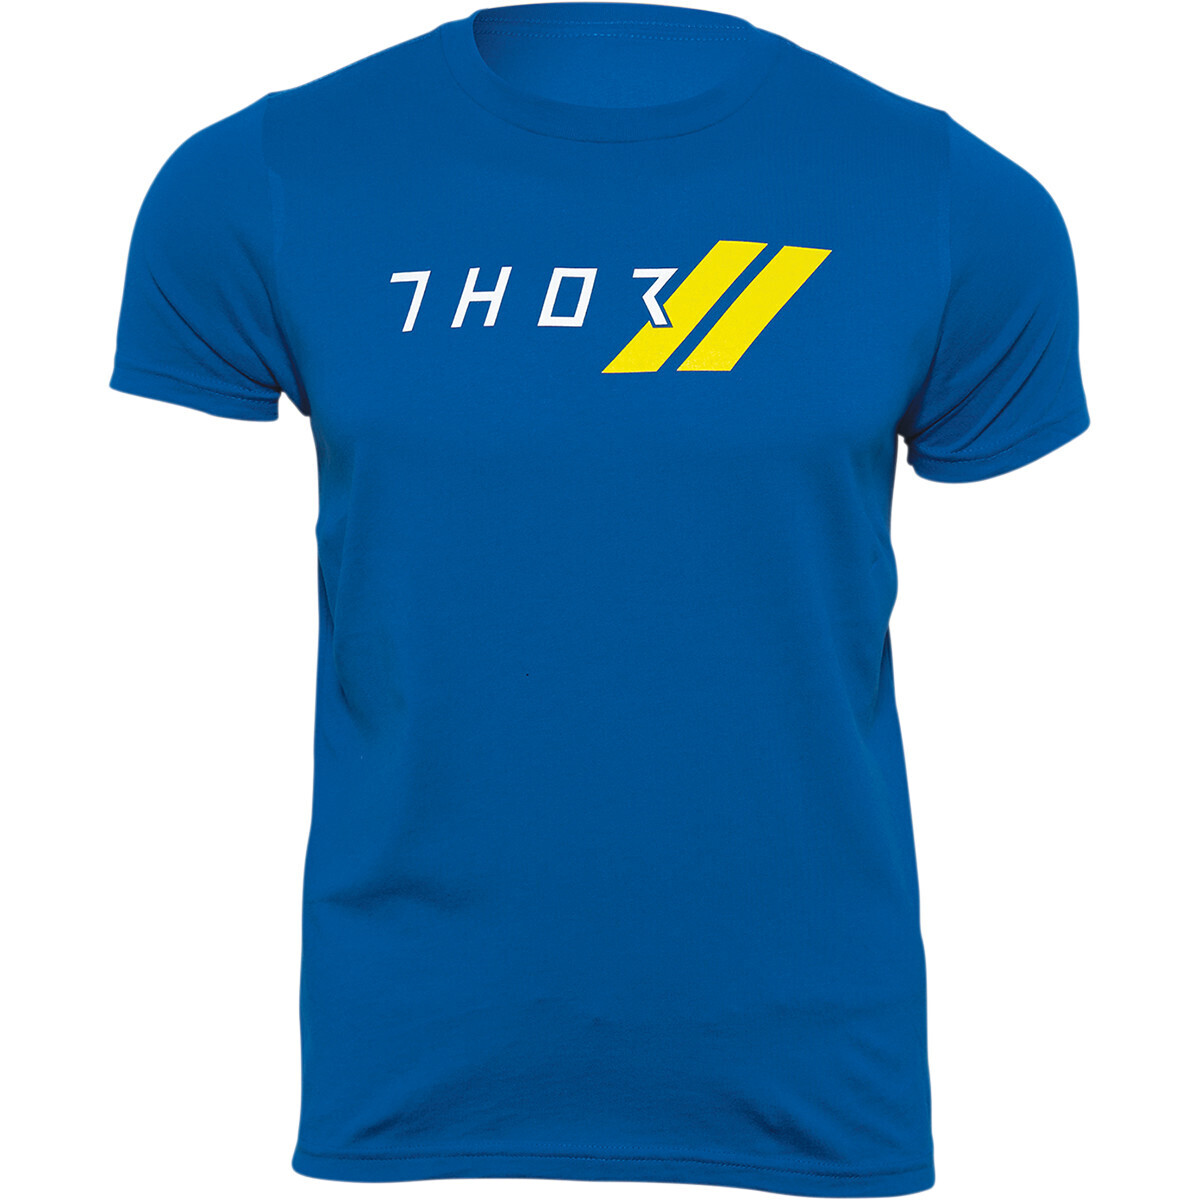 THOR
Youth Prime T-Shirt